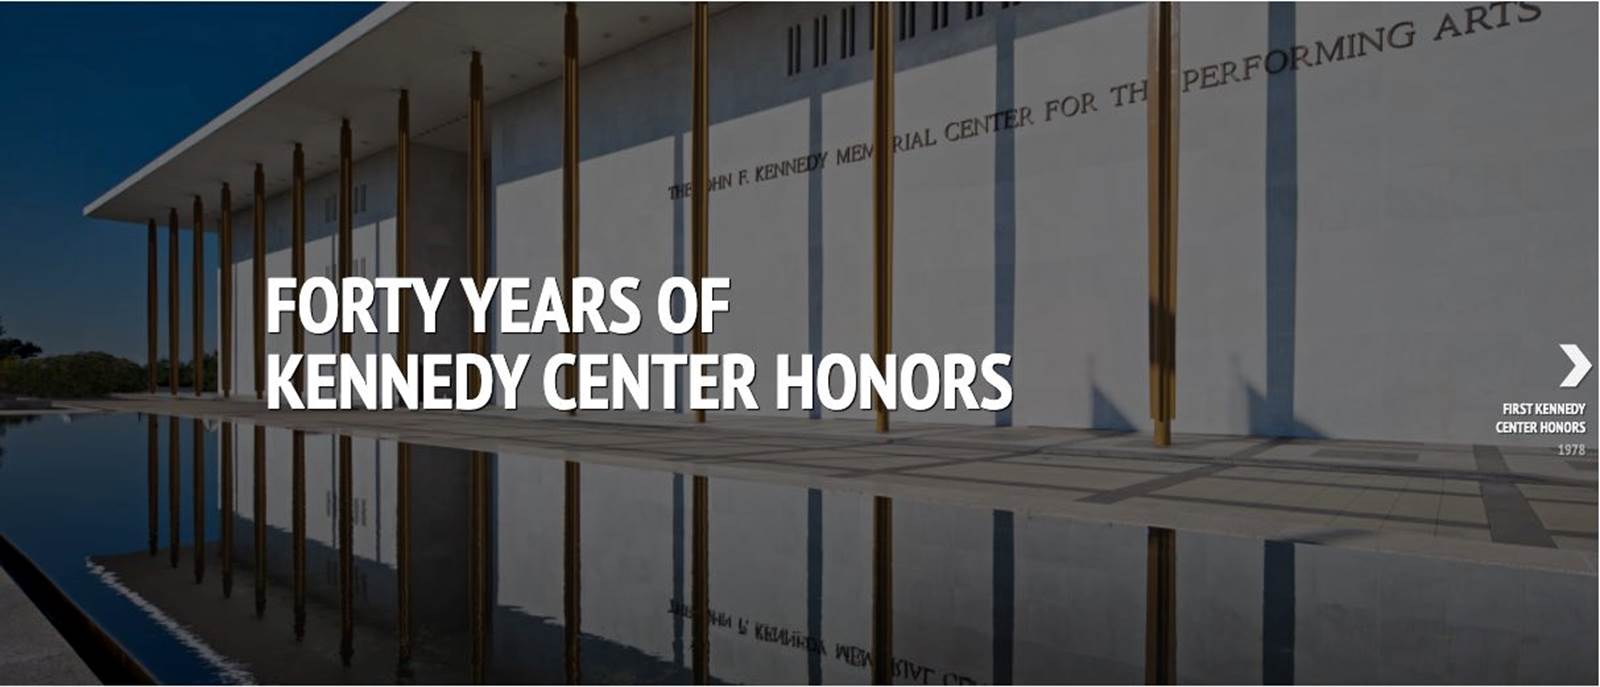 Graphic showing the Kennedy Center front architecture and the words "FORTY YEARS OF KENNEDY CENTER HONORS" and arrow prompt.